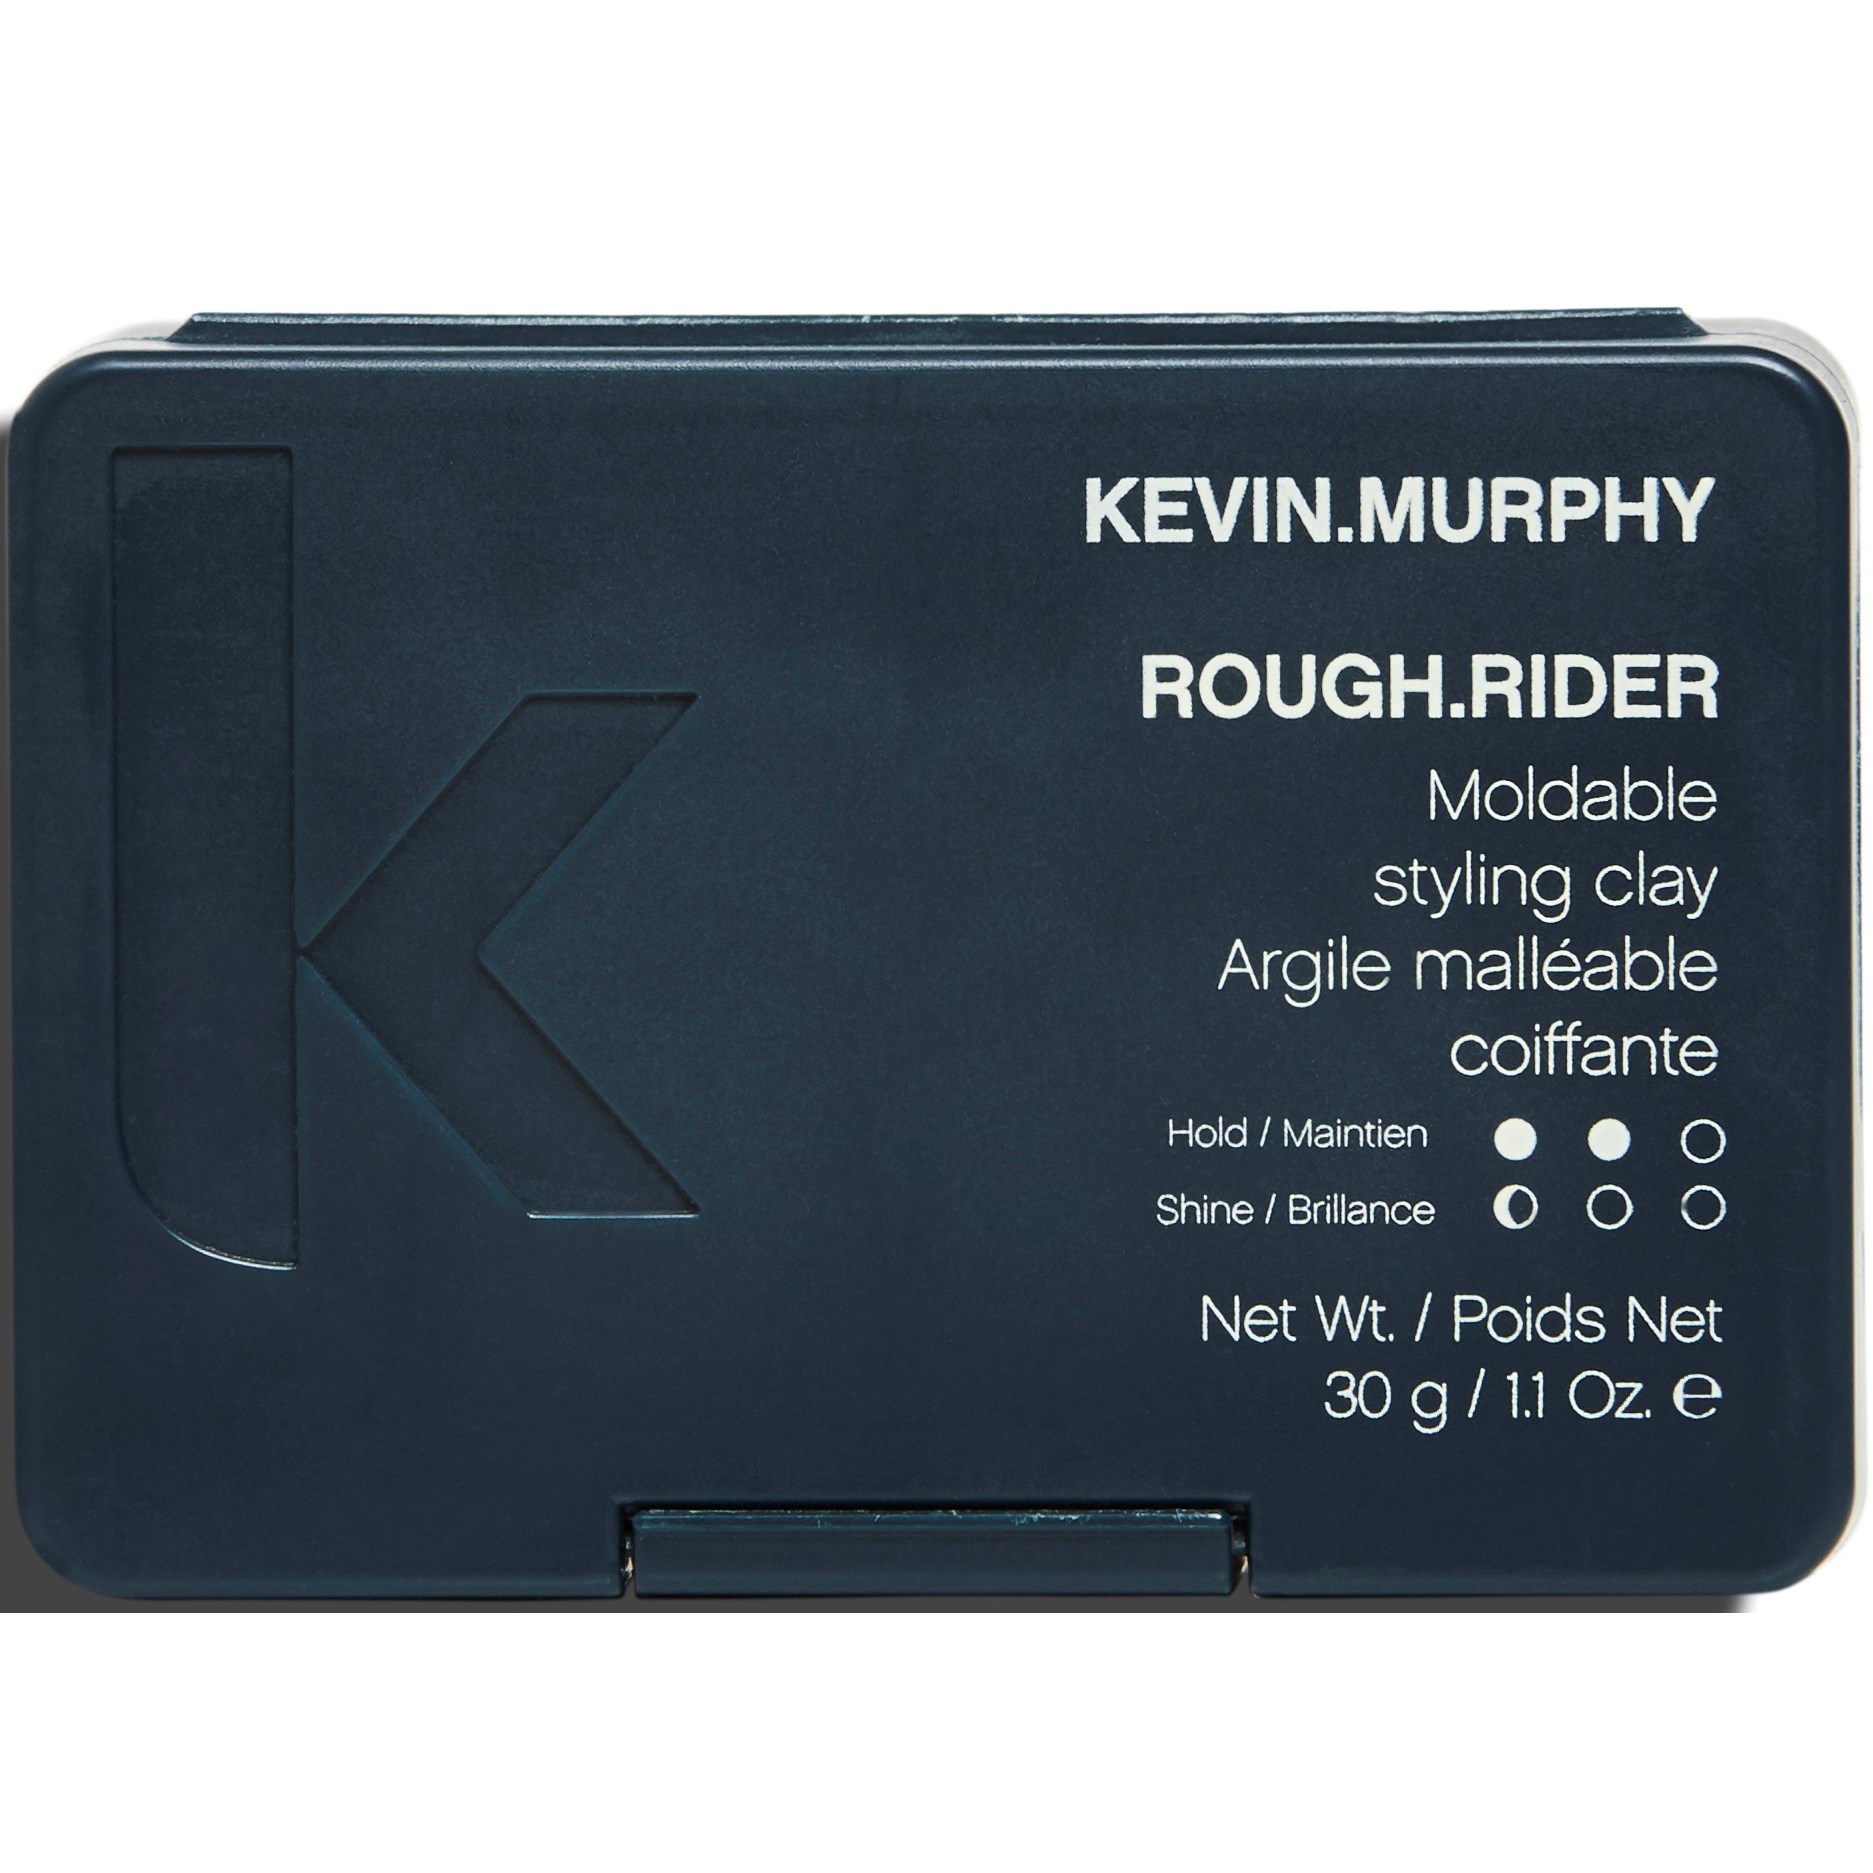 Kevin Murphy Rough.Rider 30 g